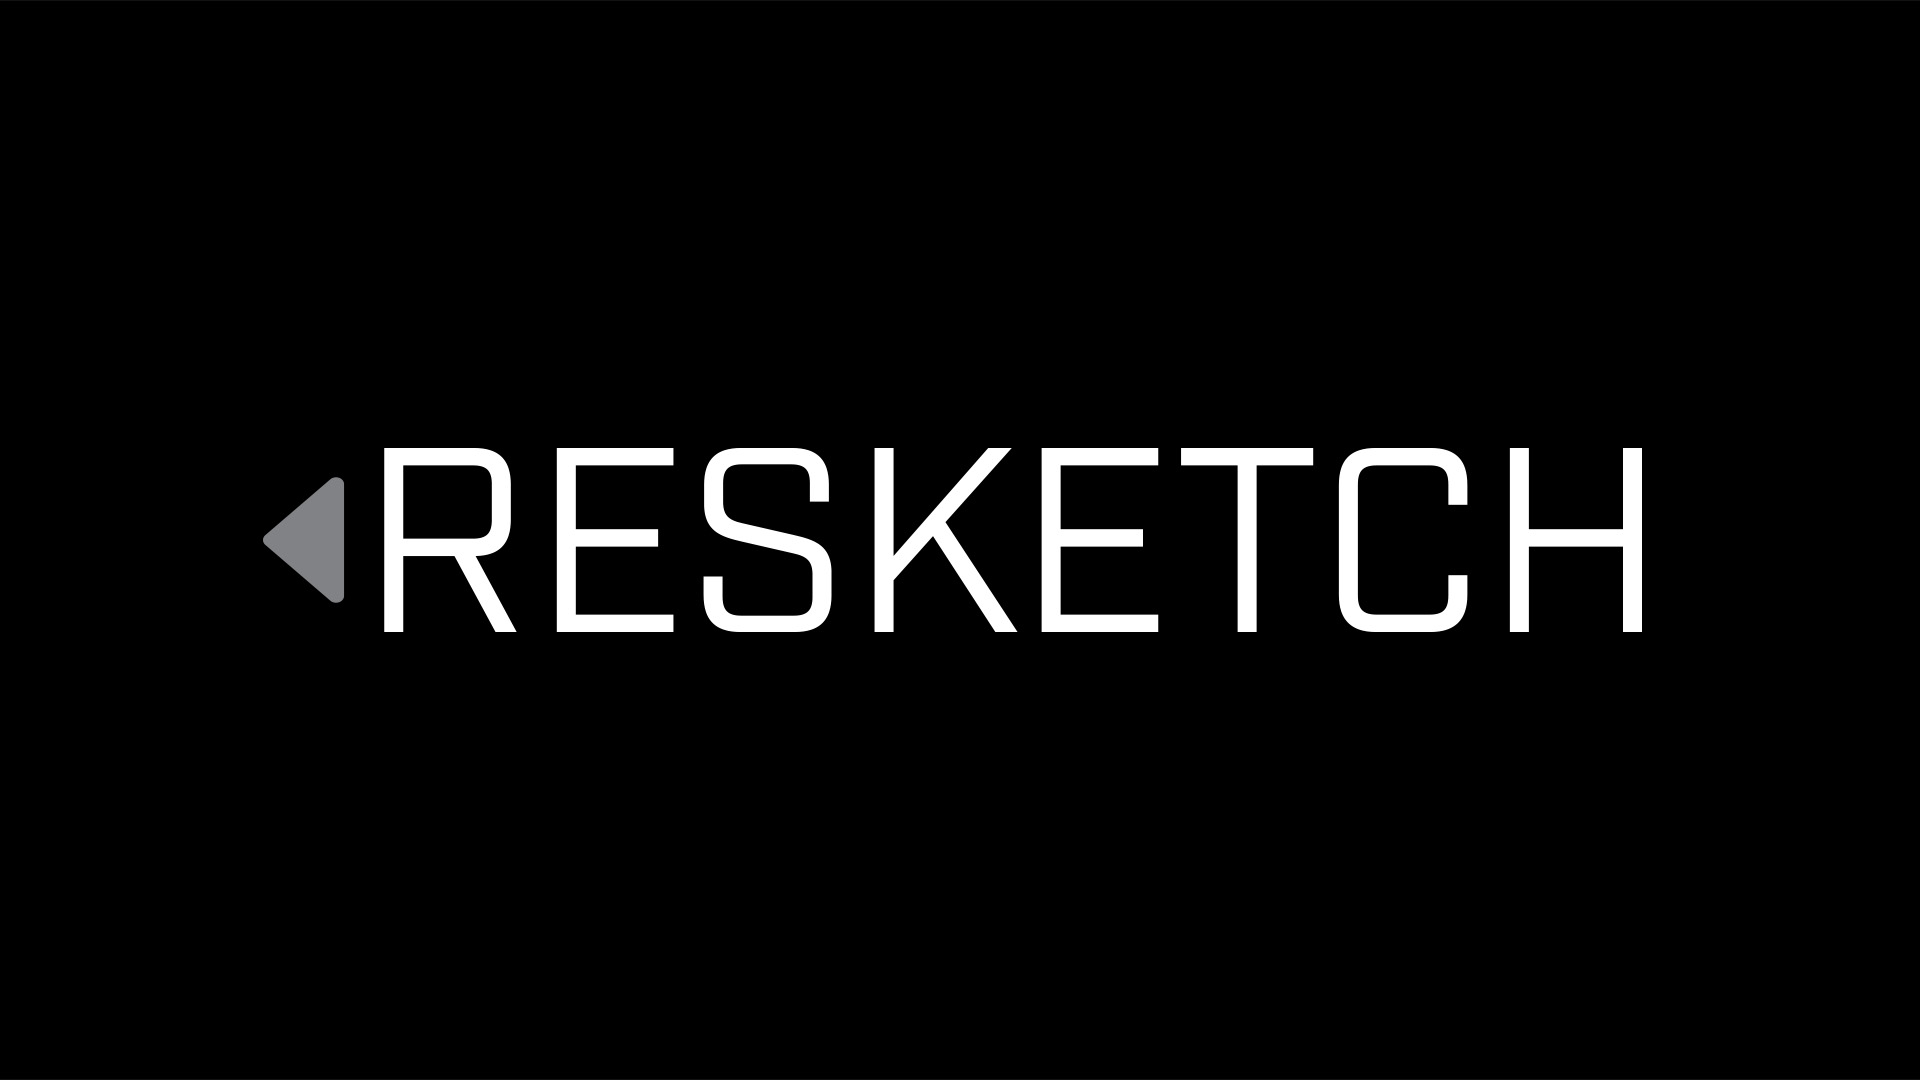 featured image five:Resketch Notebooks